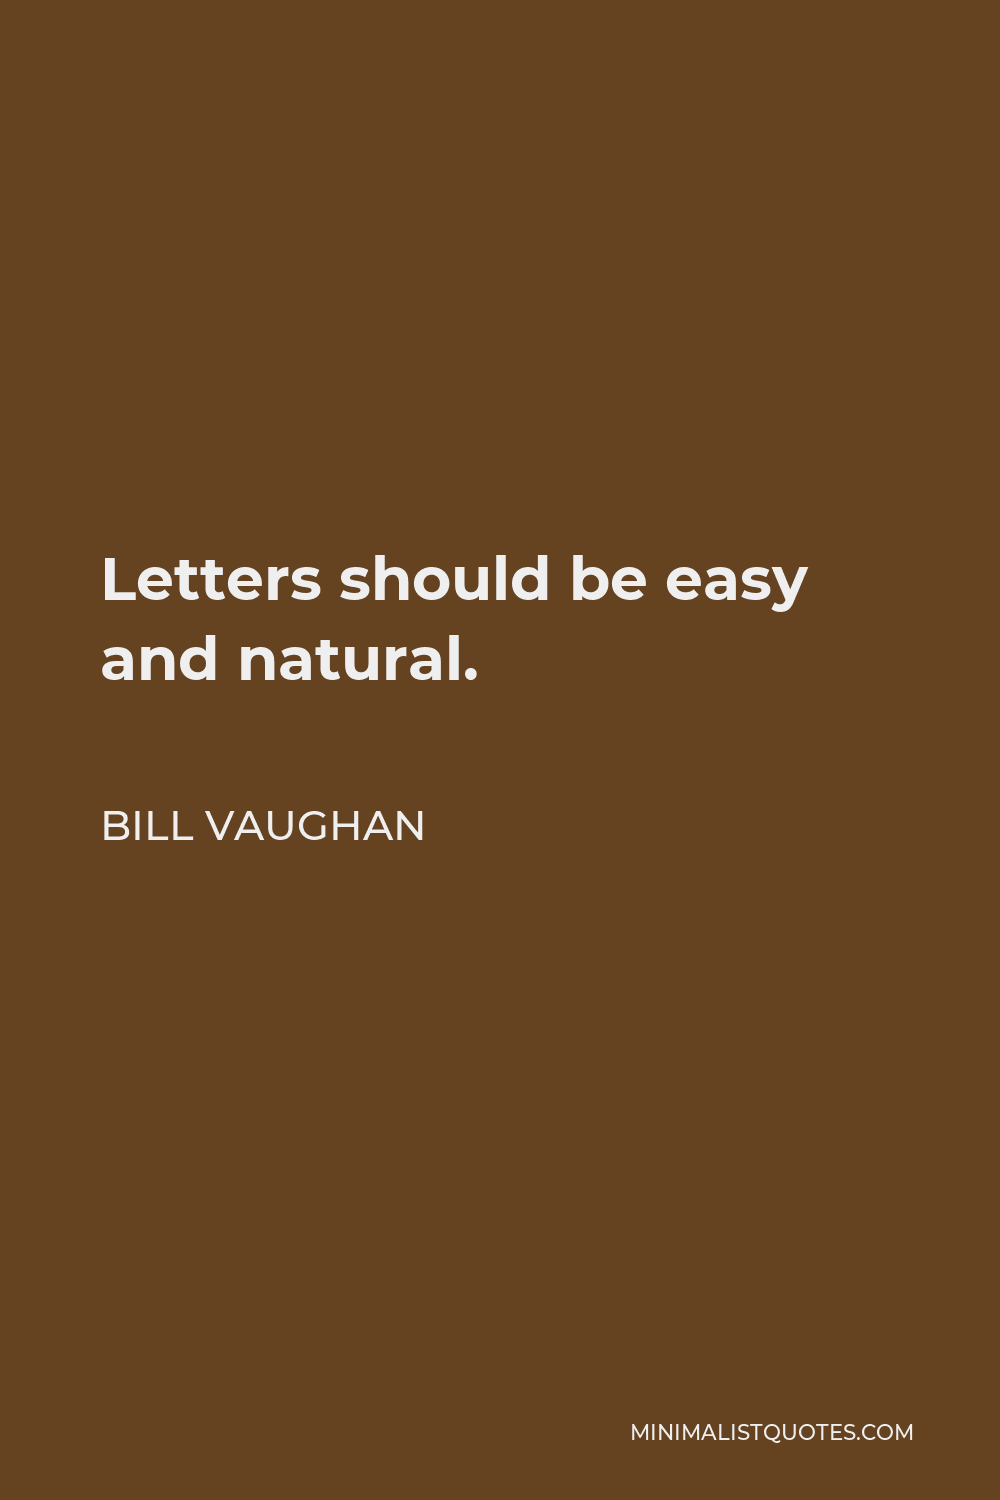 Bill Vaughan Quote - Letters should be easy and natural.